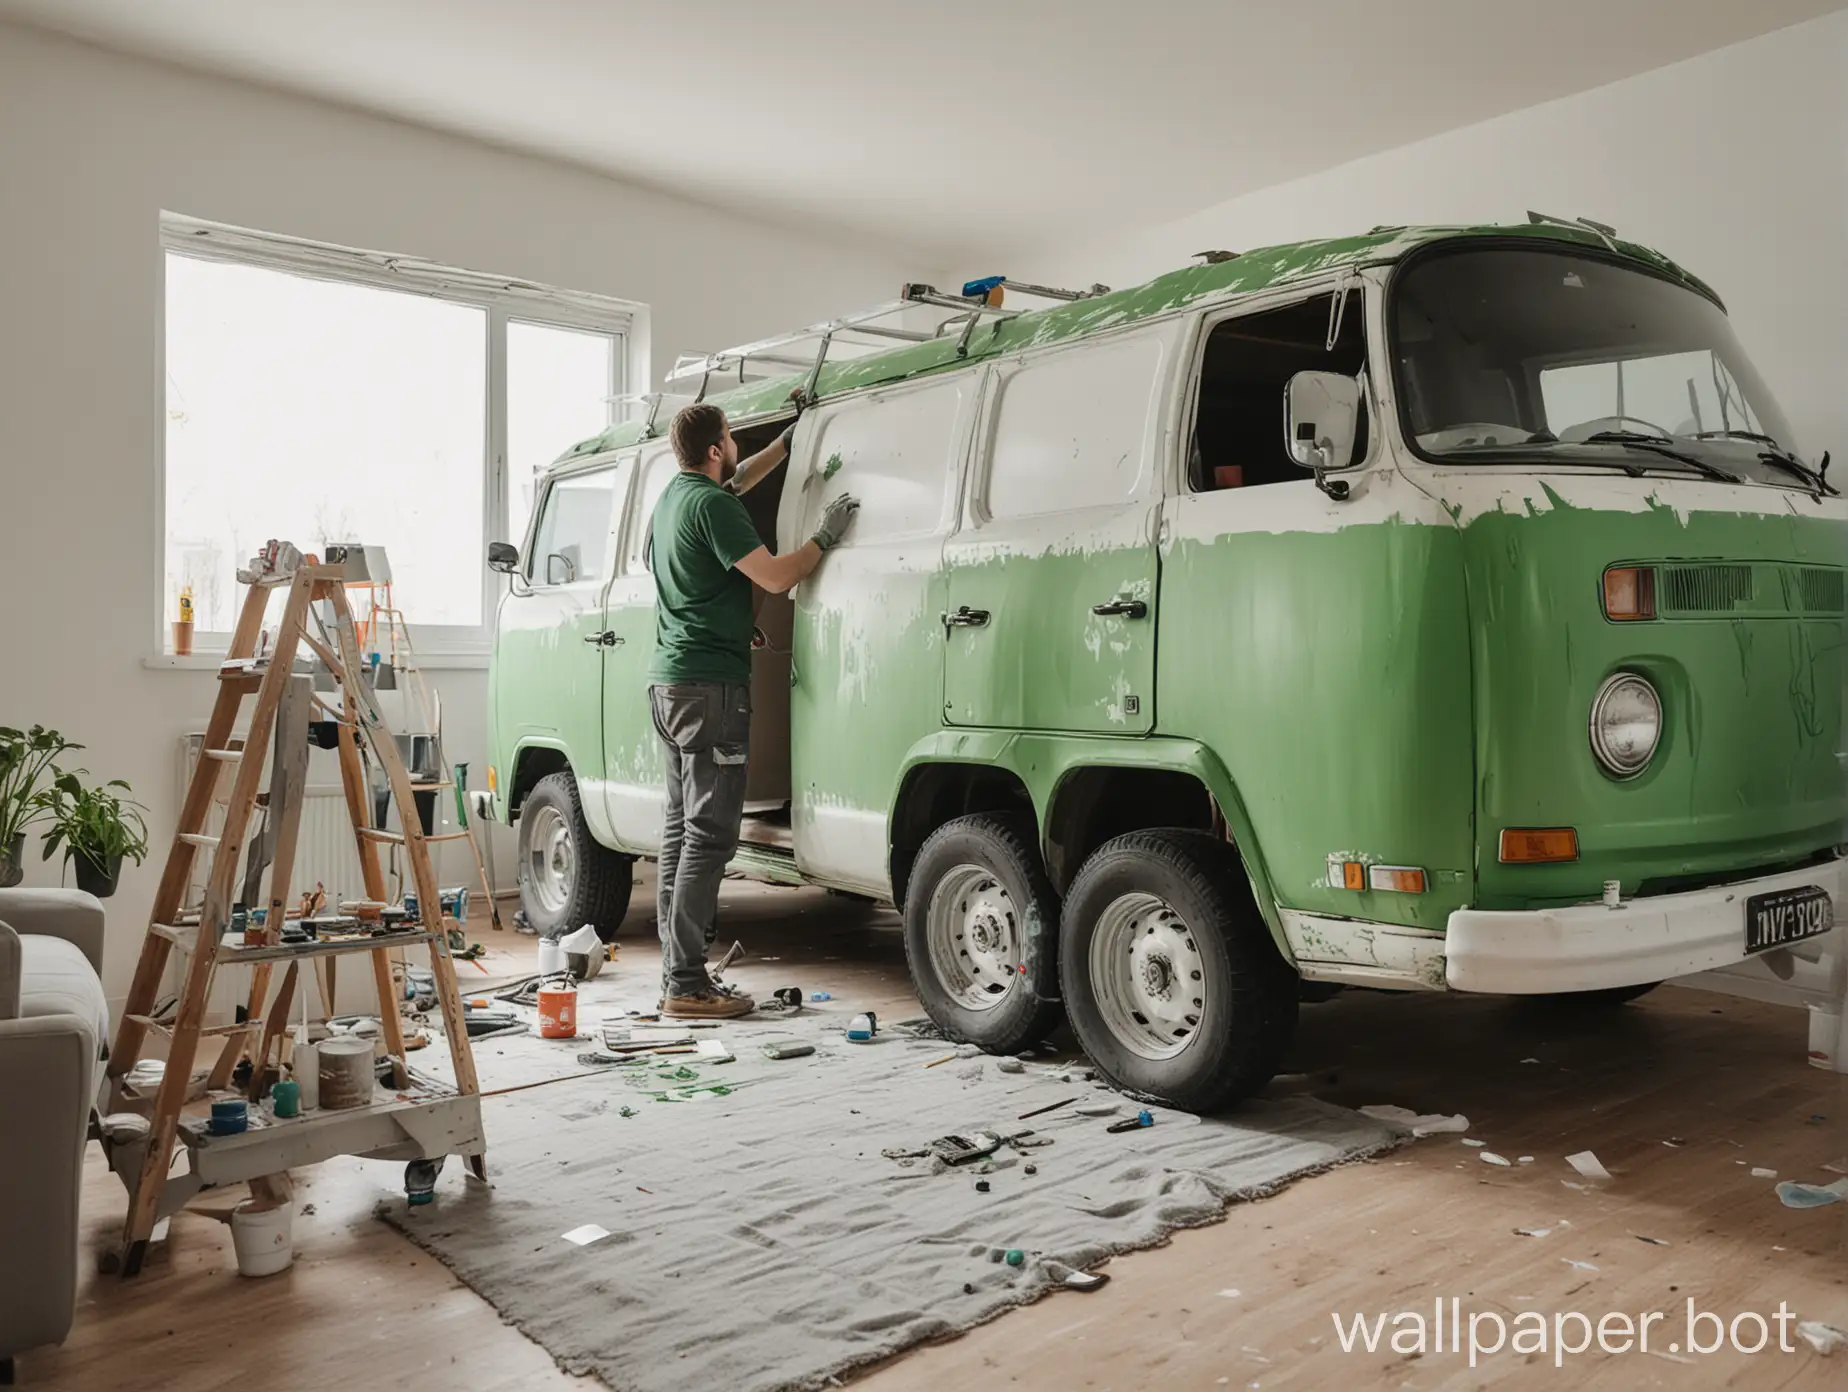 Developer-Painting-a-Green-and-White-Van-in-Living-Room